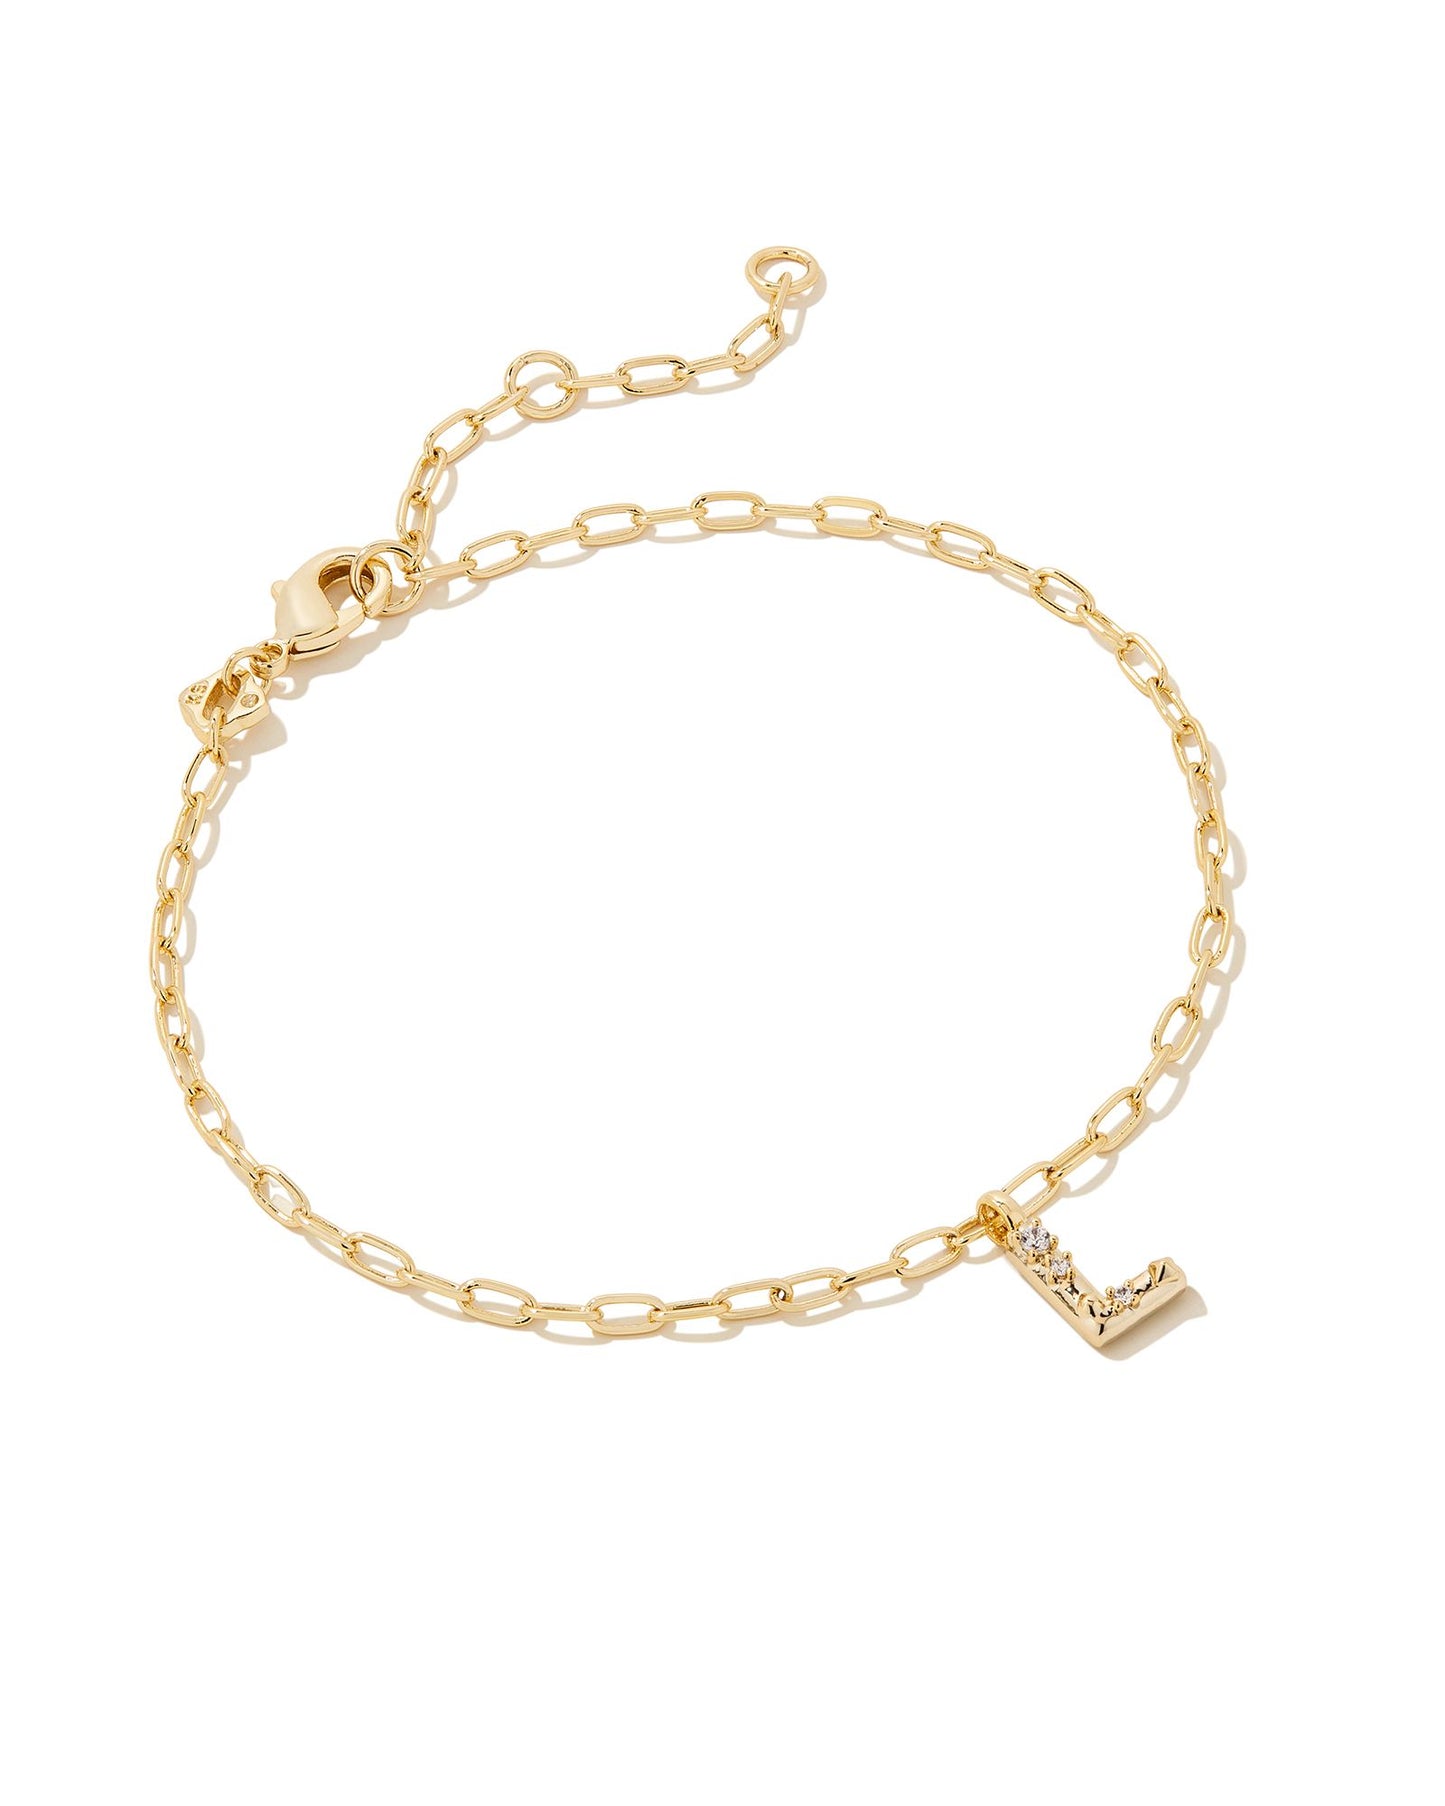 Add a personal touch to your wrist stack with the Crystal Delicate Chain Bracelet in White Crystal, our first Fashion Jewelry initial bracelet. Featuring a dainty chain and letter charm with a hint of sparkle, this bracelet is the perfect way to celebrate the ones you love—including yourself!  Dimensions- 6.5' CHAIN WITH 1.5' EXTENDER, 0.45'L X 0.26"W PENDANT Metal- 14K Gold plated over brass Closure- Lobster Clasp Material-  White CZ Letter L